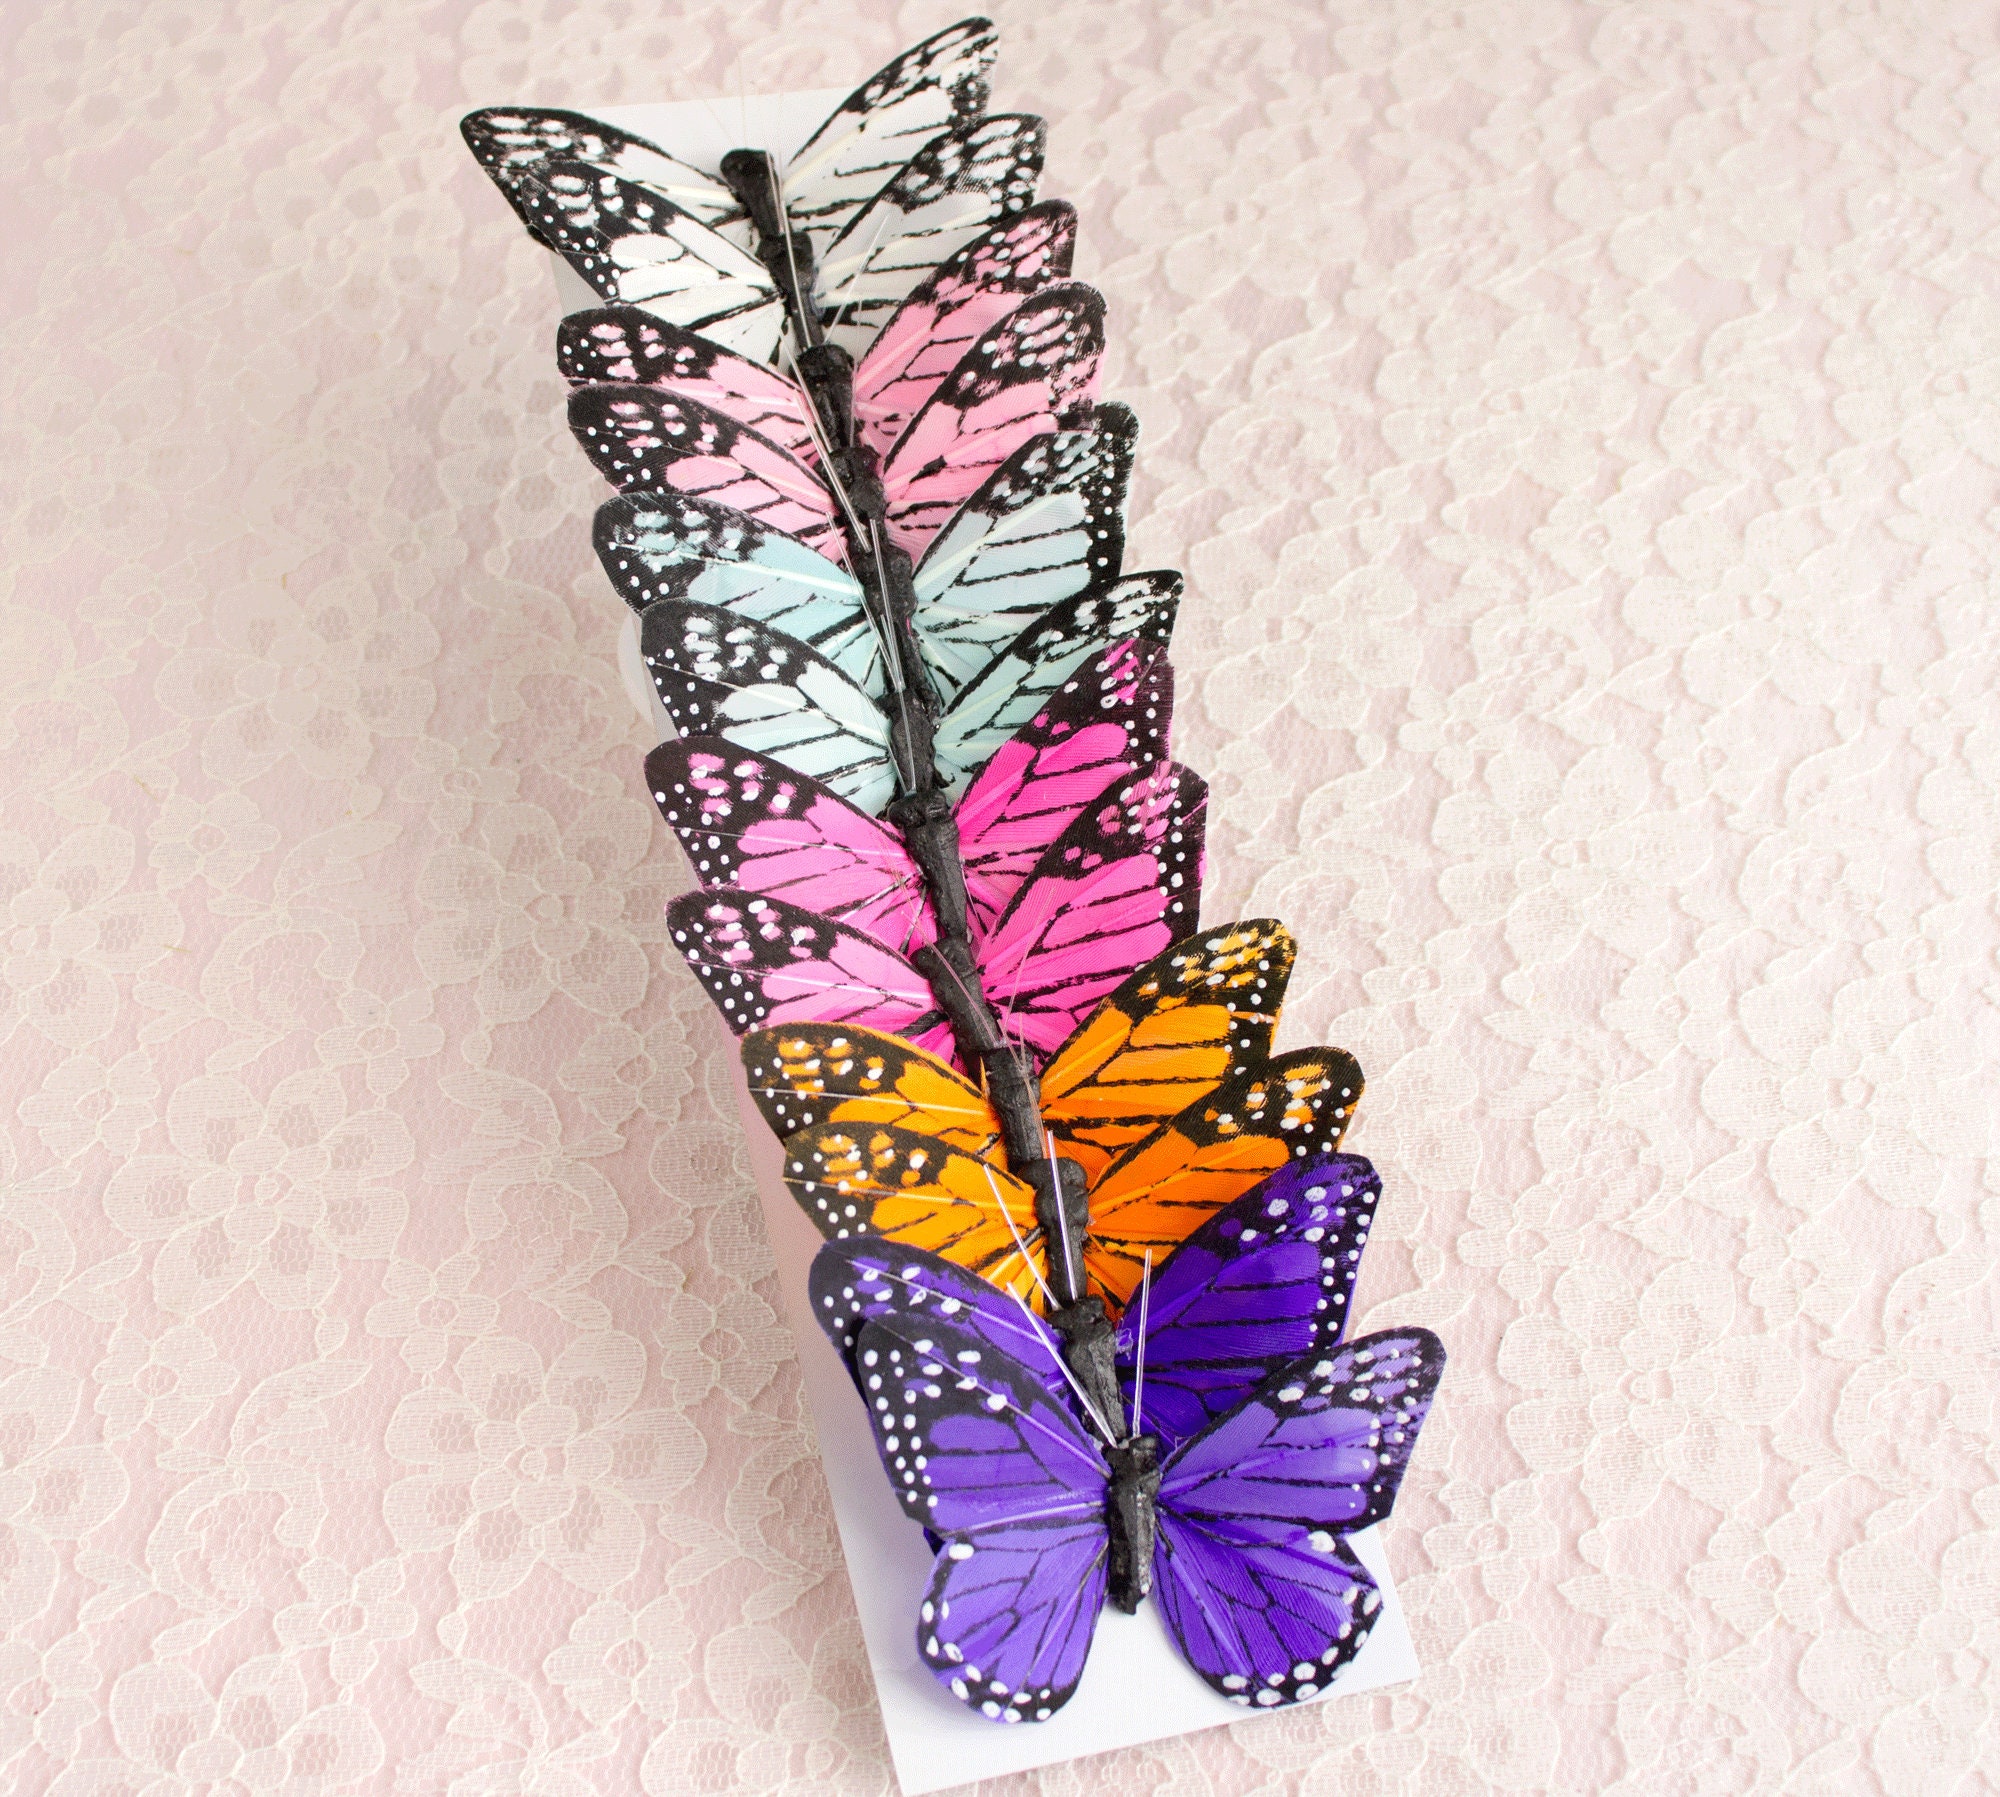 Led Lighted Butterfly Bouquet, Forever Flowers, Butterfly Led